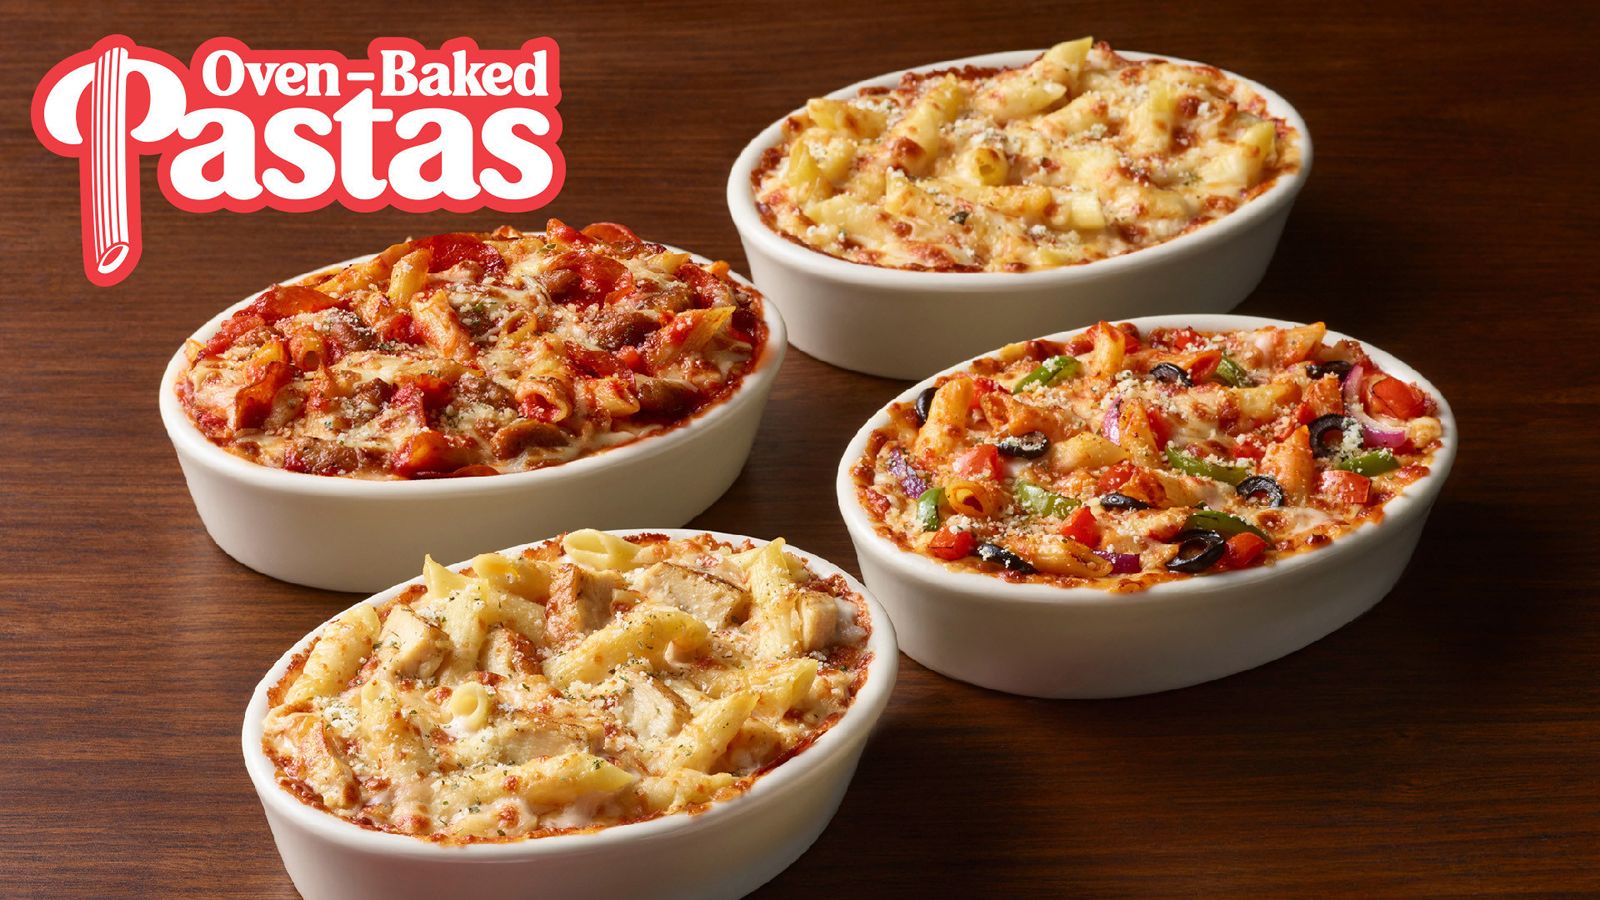 A Penne for Your Sauce: Pizza Hut Introduces New Oven-Baked Pastas to Menus Nationwide